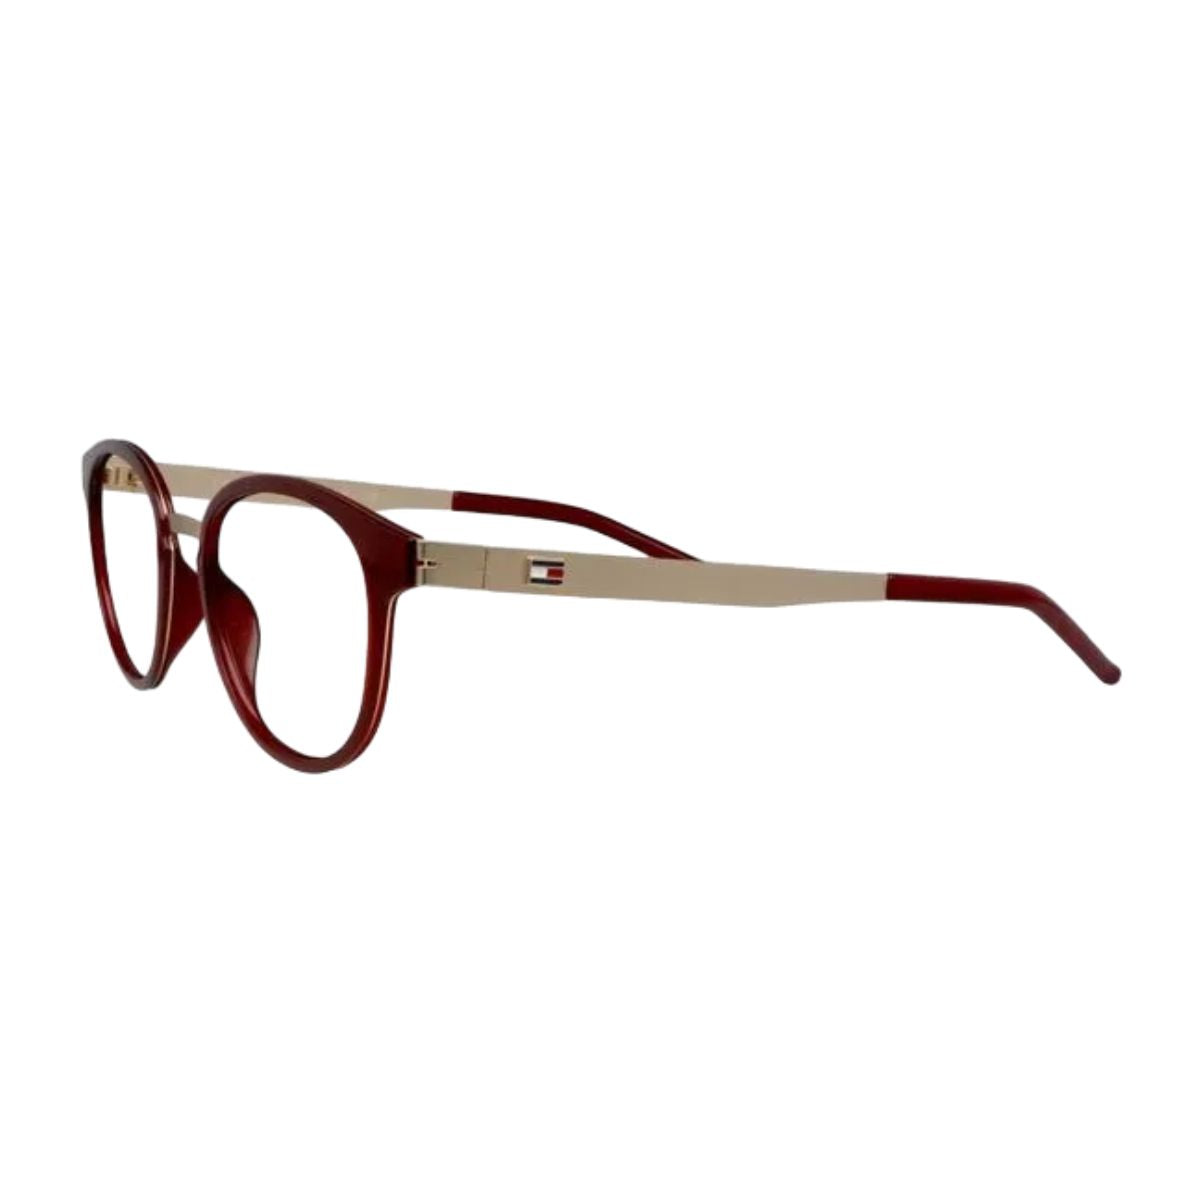 "buy Tommy Hilfiger 6005 C2 spactacle frame for men's and women's at optorium"